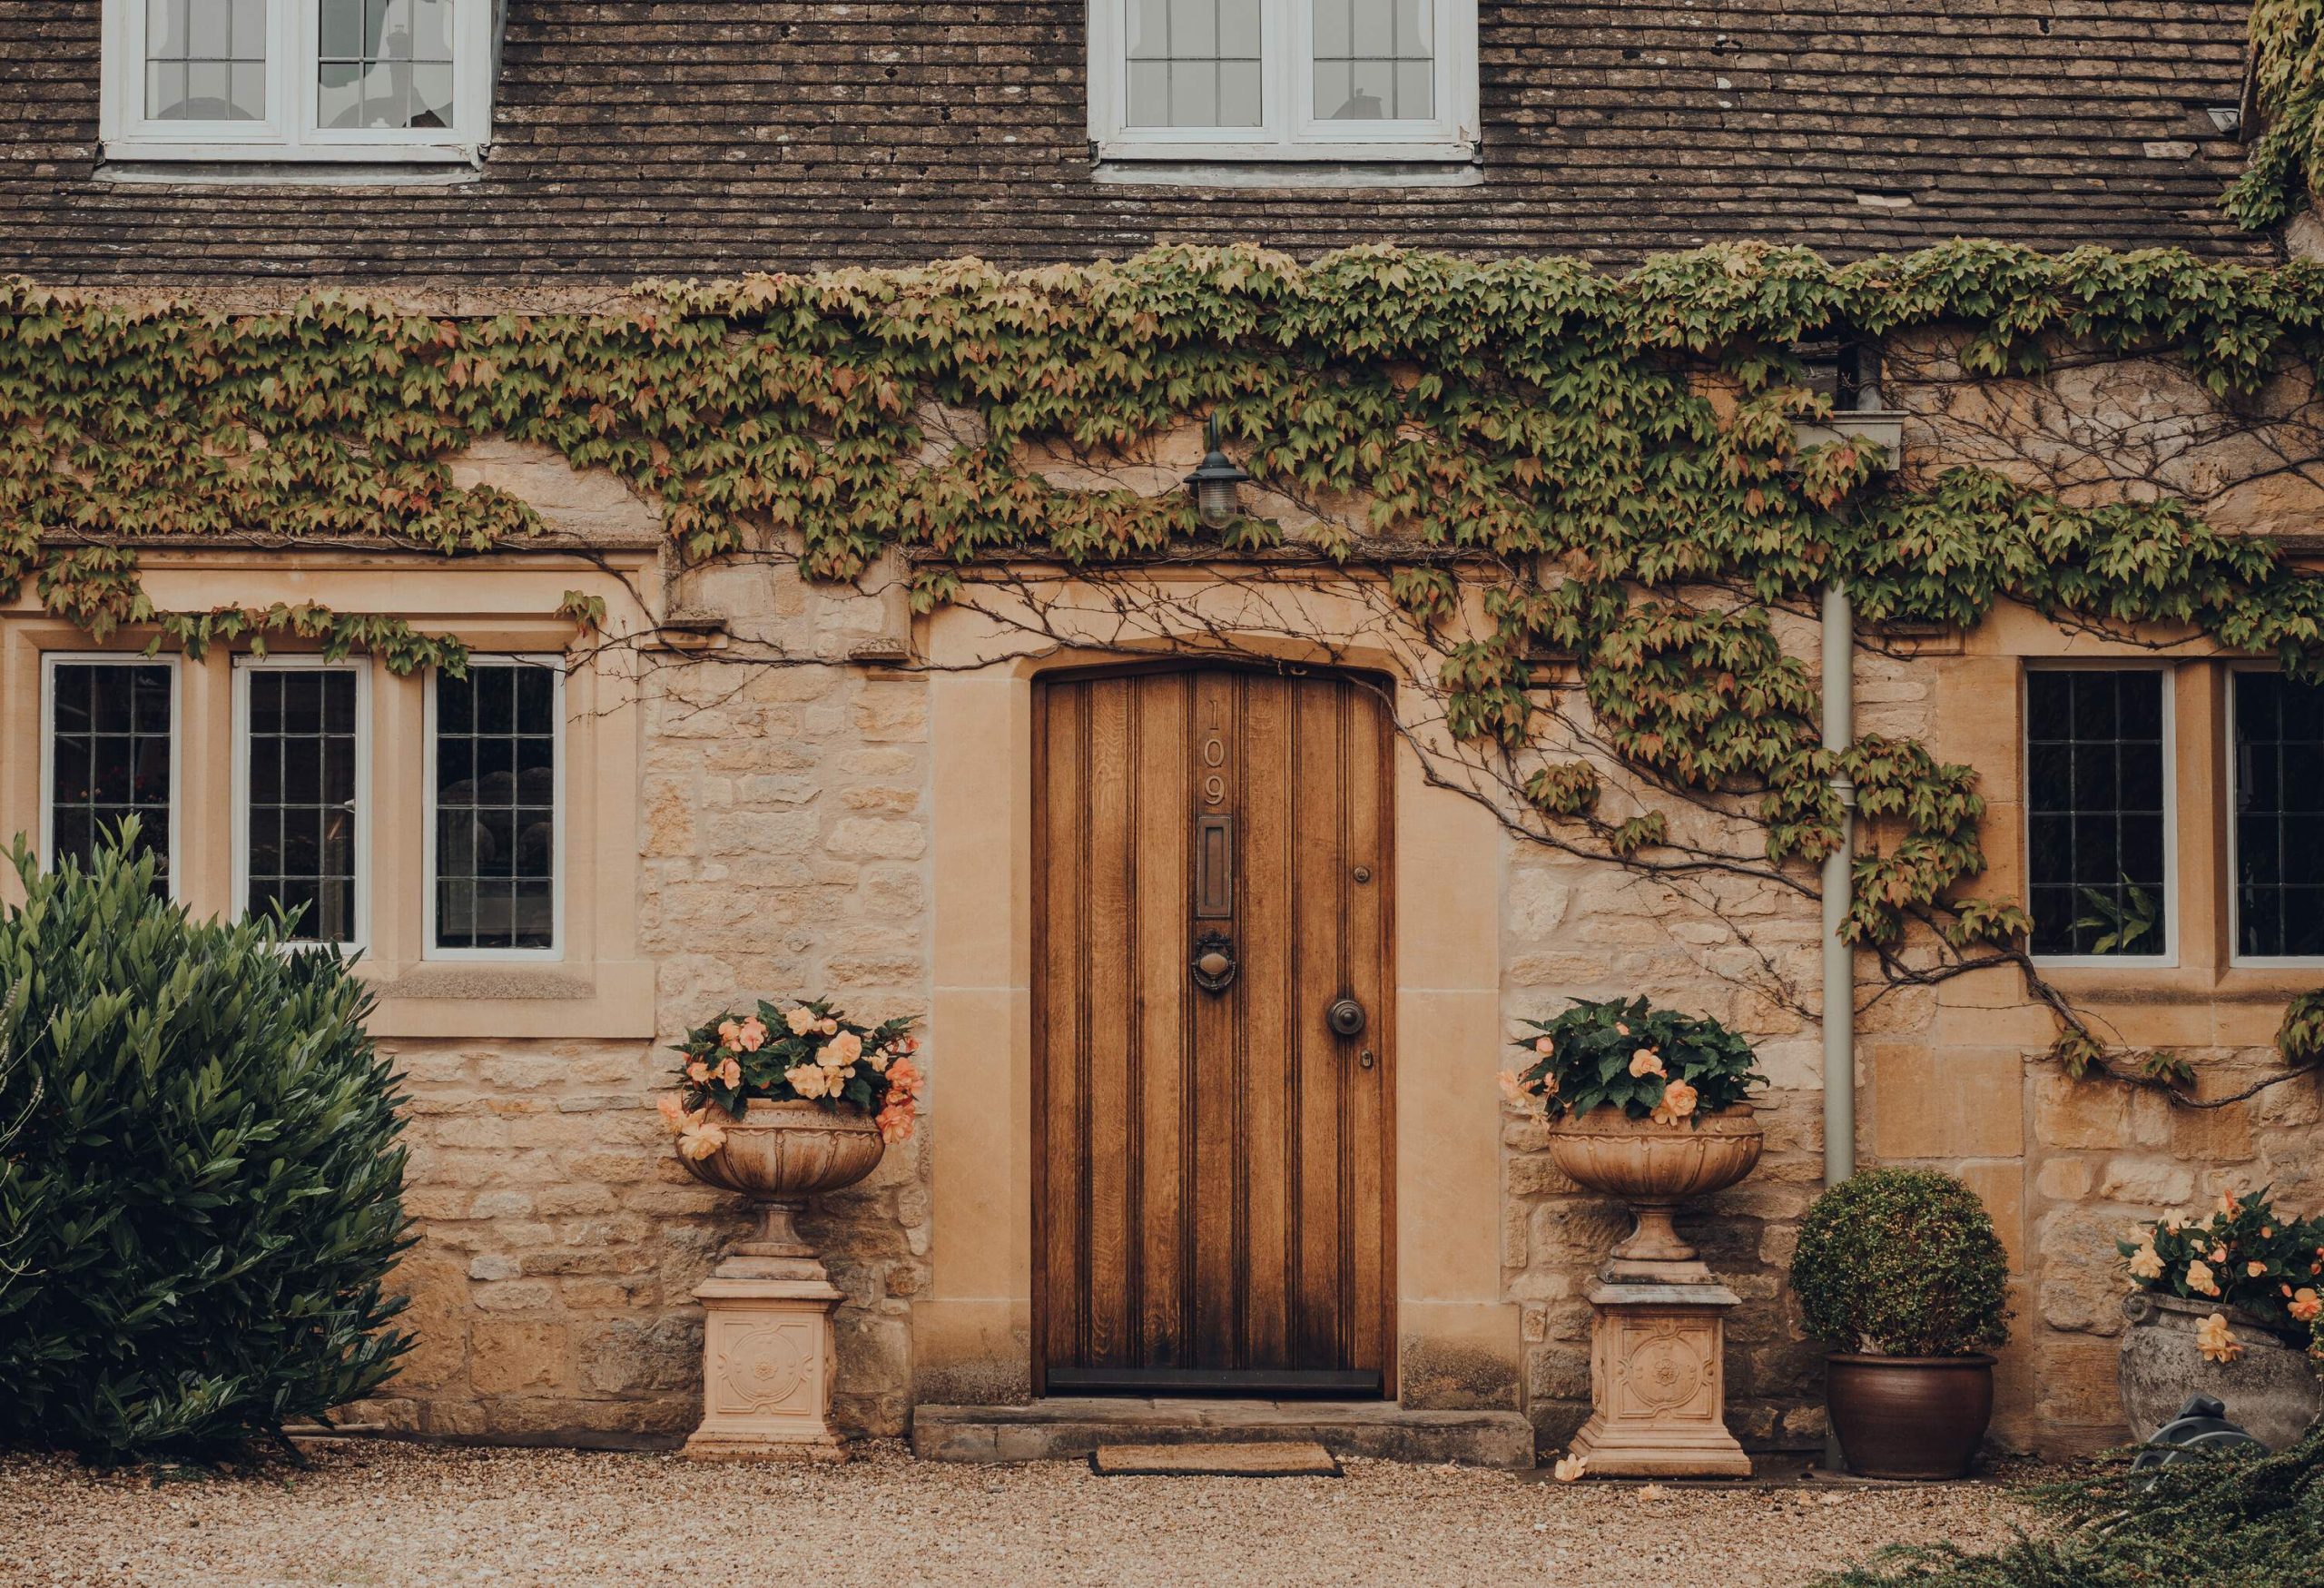 dest_uk_cotswolds_broadway_theme_stays_cottage_rental_vacation_home-gettyimages-1277502342_universal_within-usage-period_82986